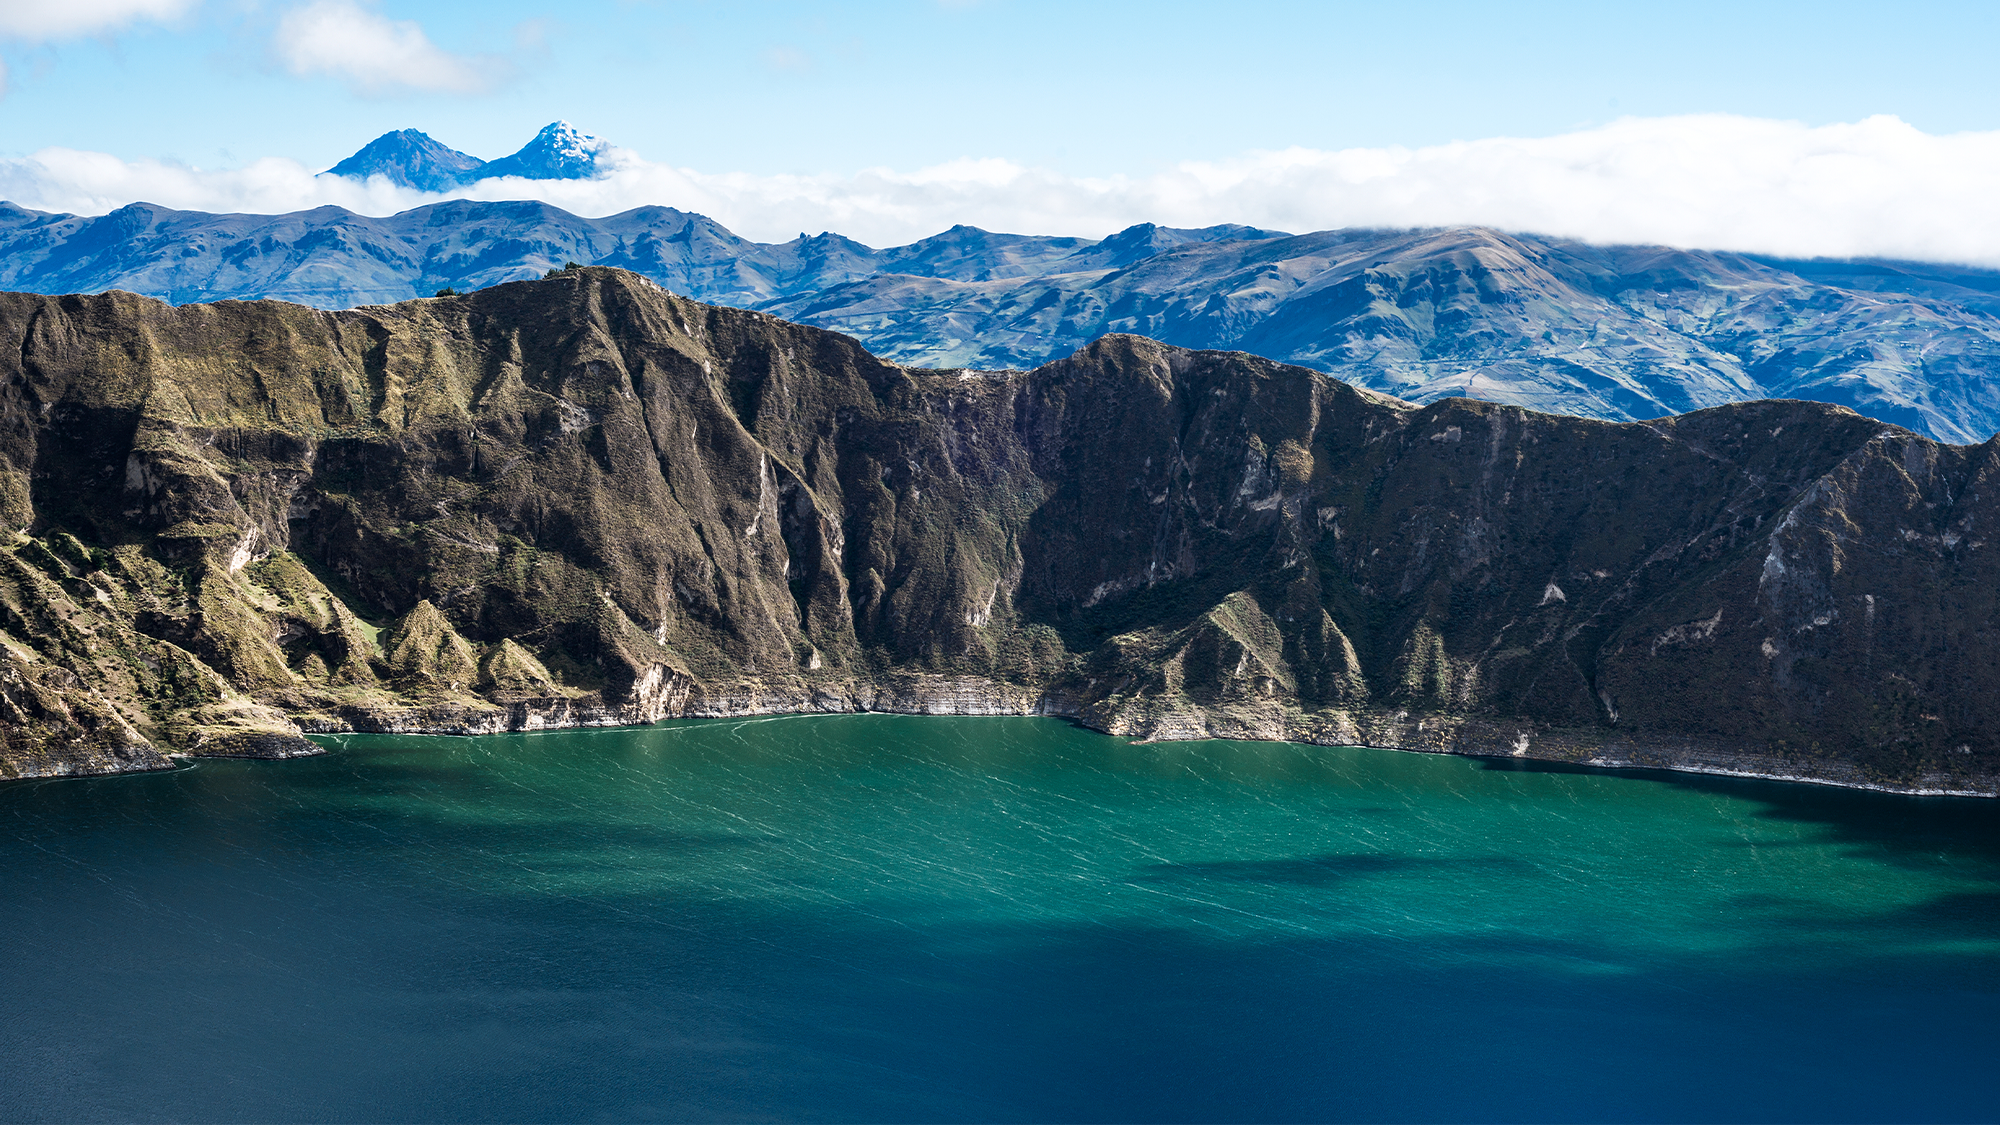 Ilinizas Volcanoes under the Quilotoa lagoon in the Andes Mountains in Ecuador. Scientists recently discovered two new carnivorous plant species in the rugged high Andes.